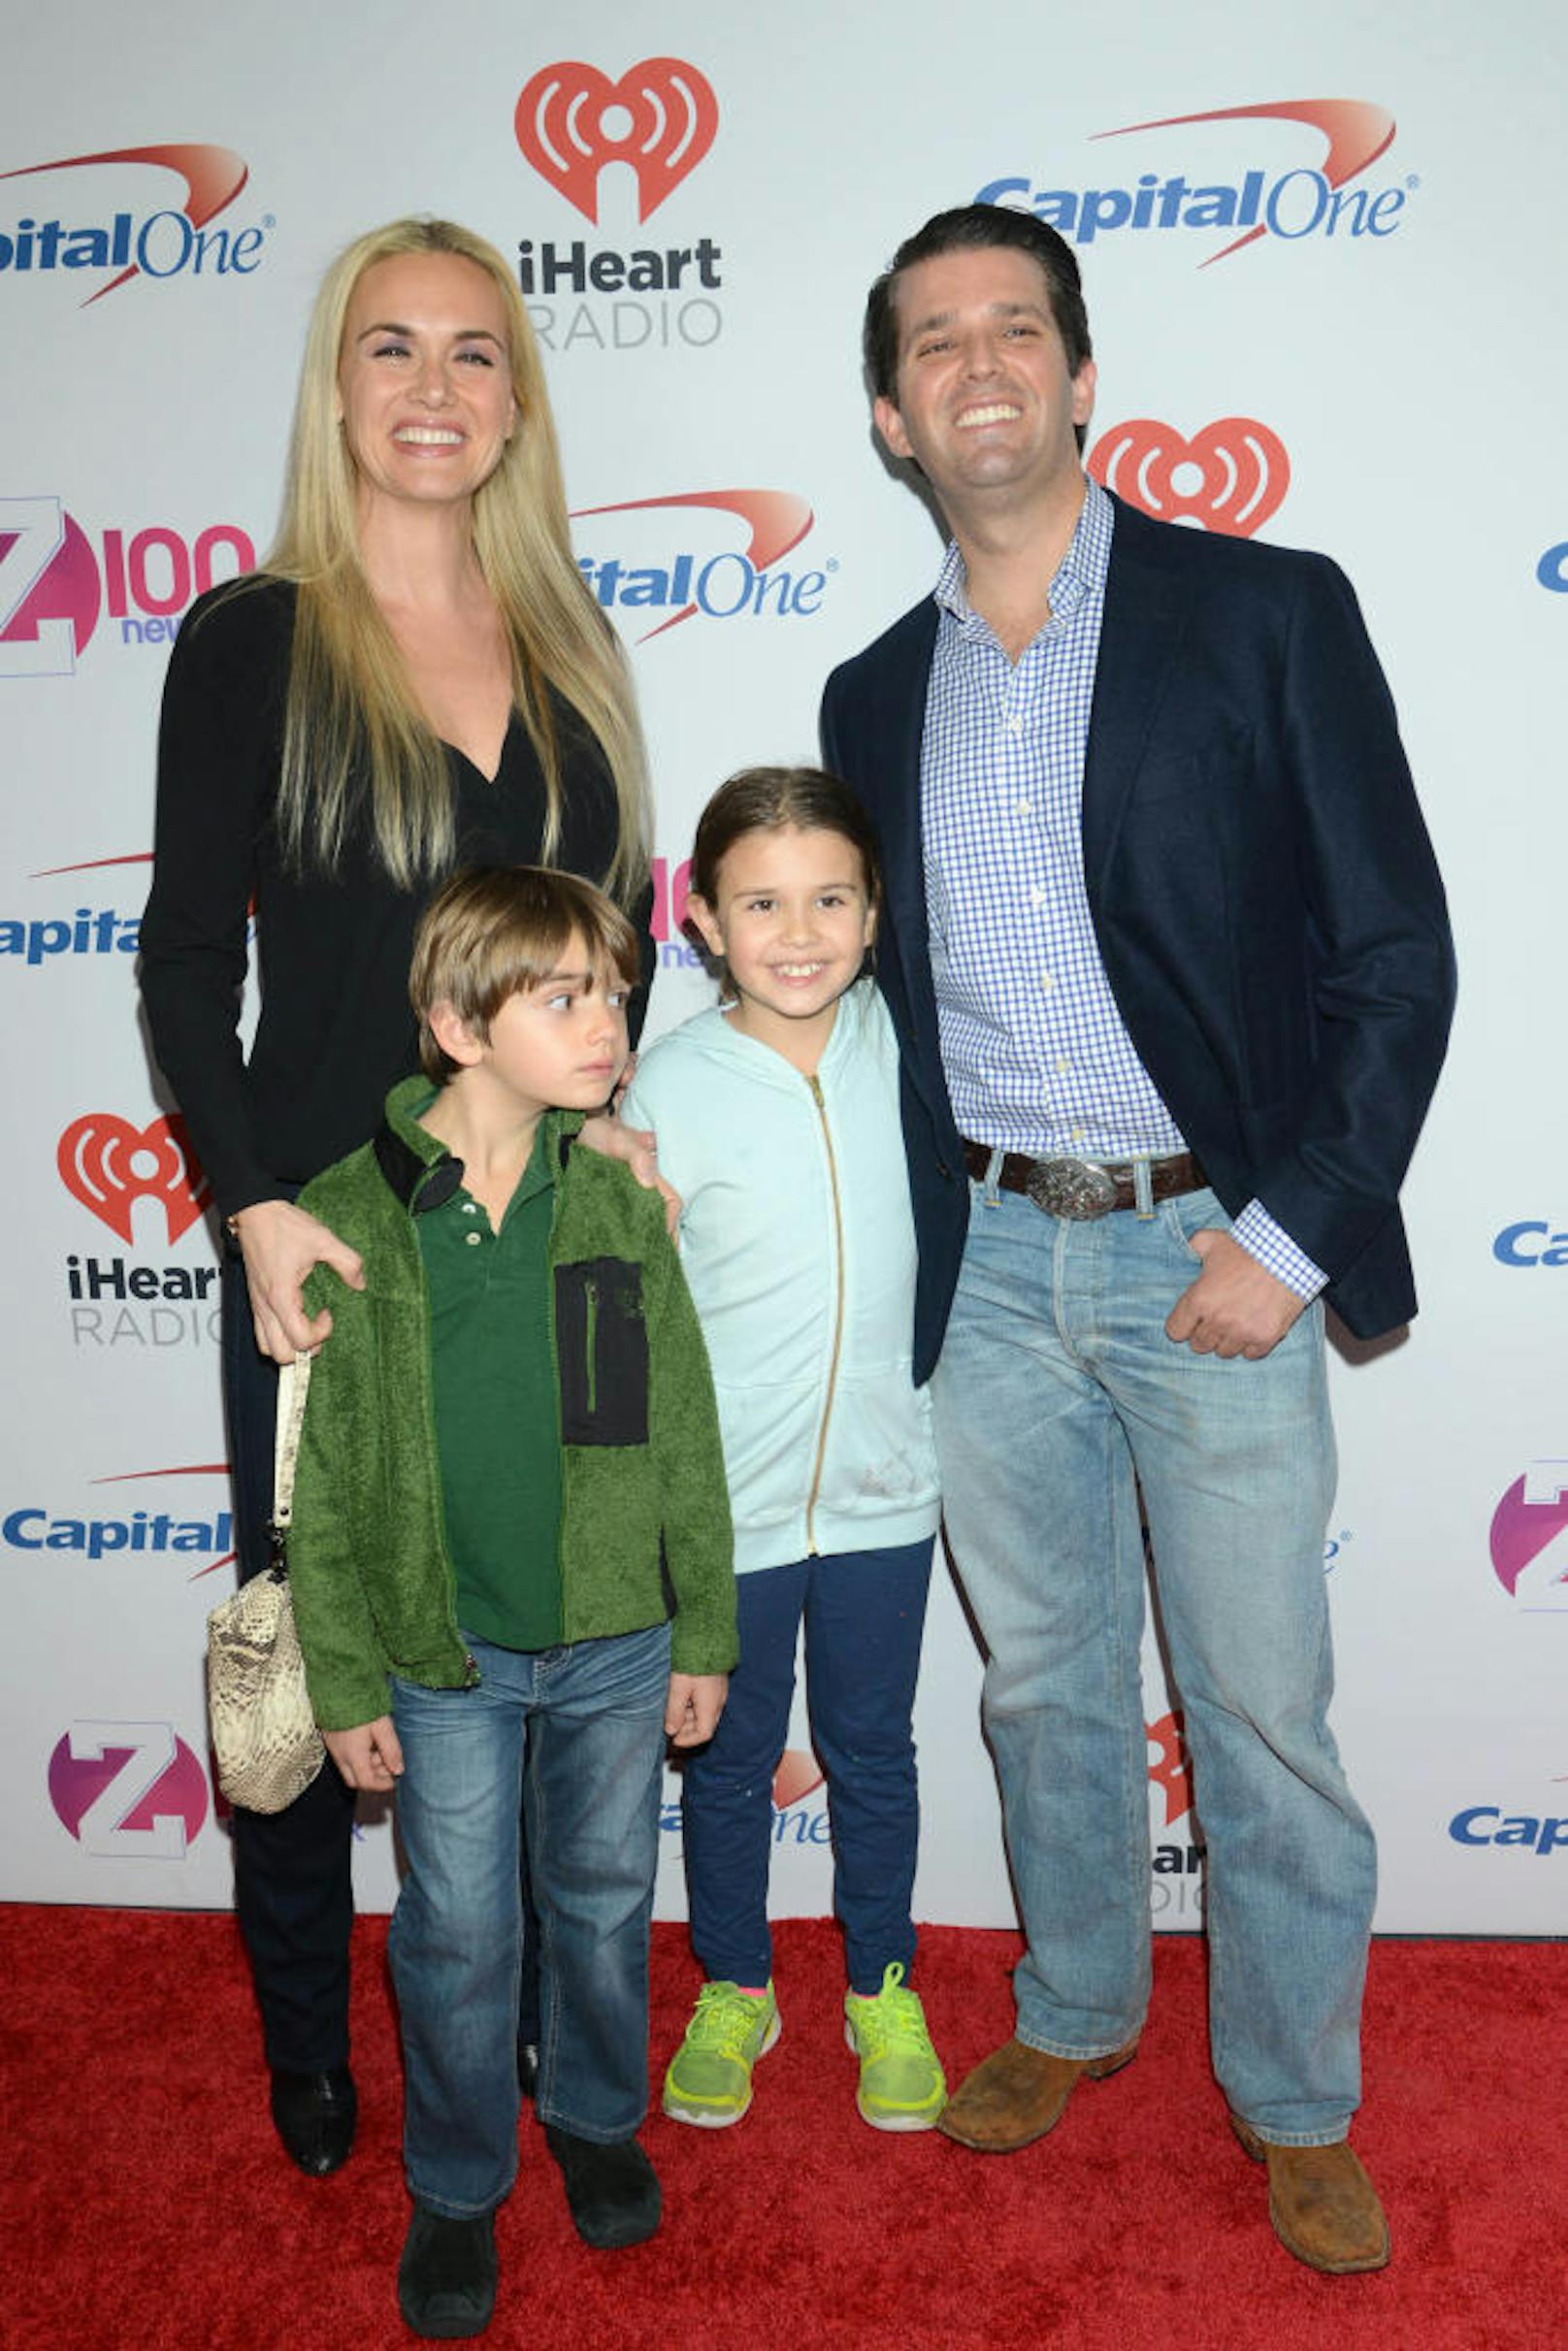 Download von www.picturedesk.com am 15.03.2018 (14:54). 
ACT action_20939143 -- Donald Trump Jr. , Vanessa Haydon, Kai Madison and Donald John I beim Z100's Jingle Ball in New York / 111215 *** Z100's Jingle Ball, New York, 11 Dec 2015 ***. - 20151211_PD11057